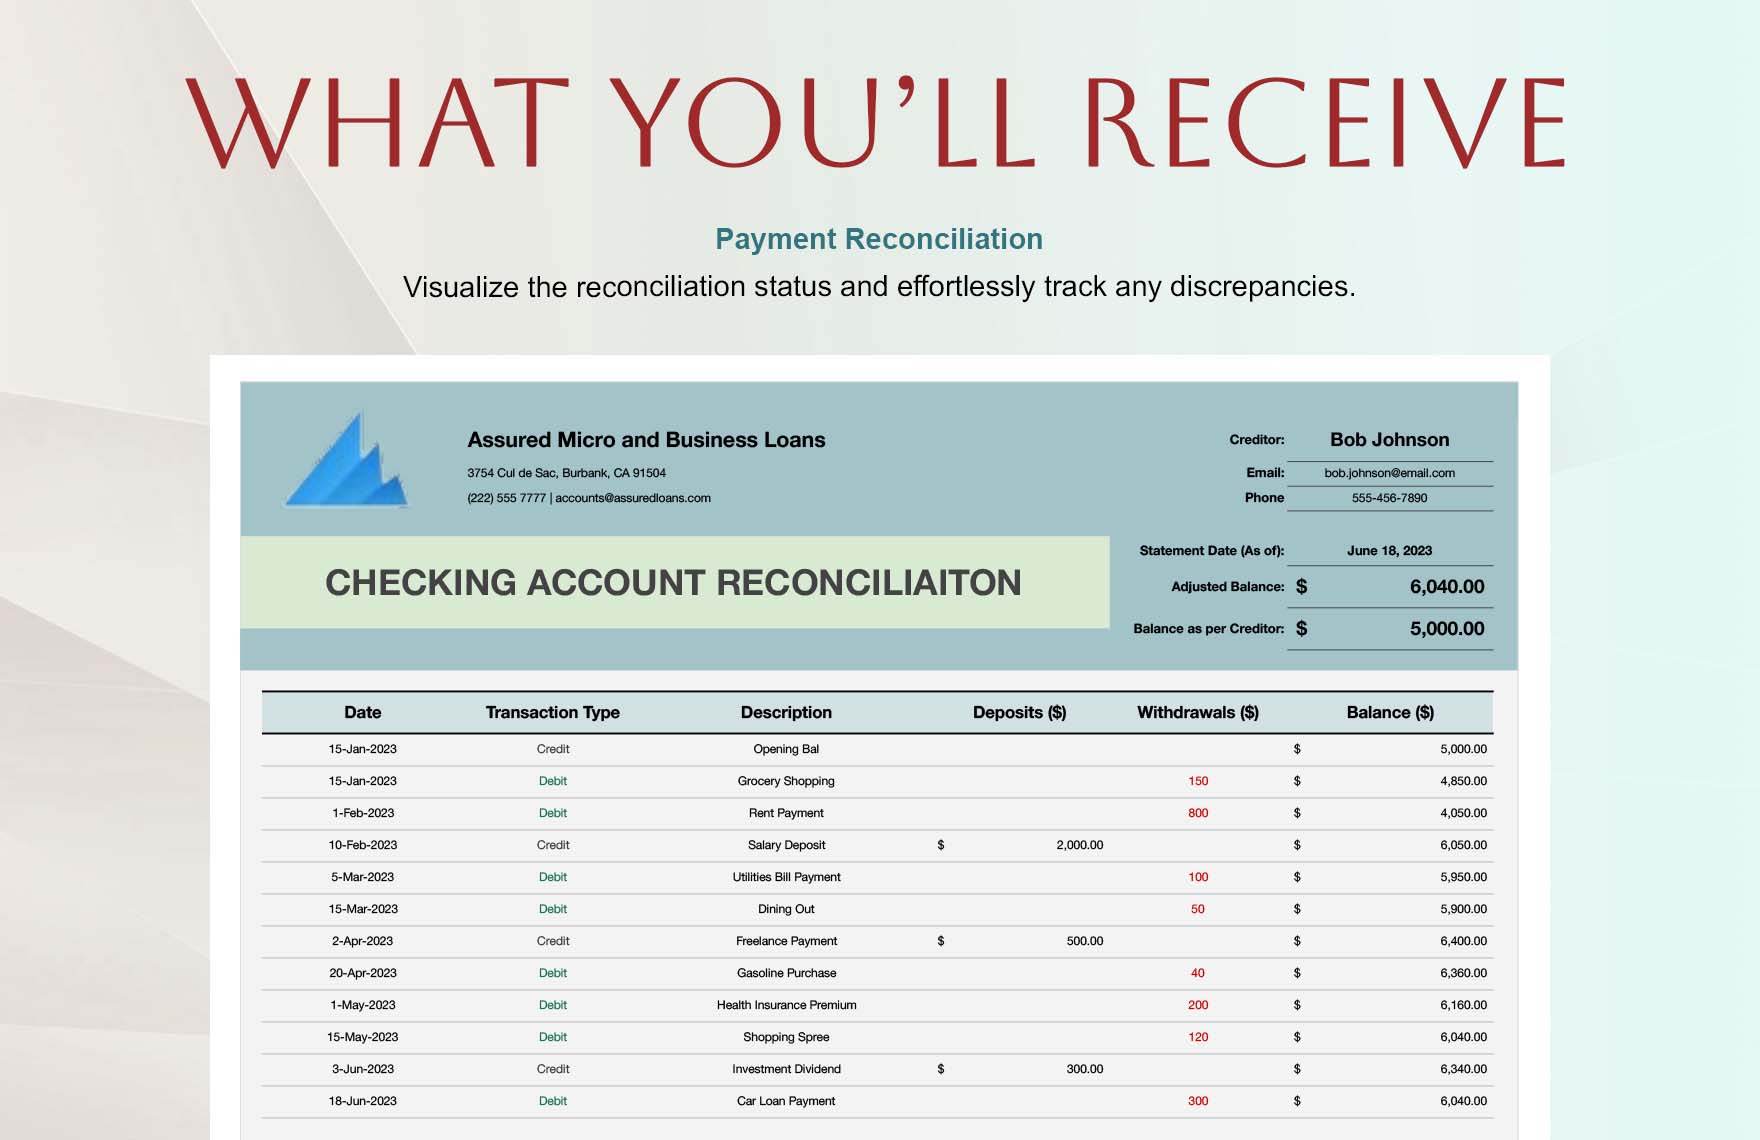 Checking Account Reconciliation Template